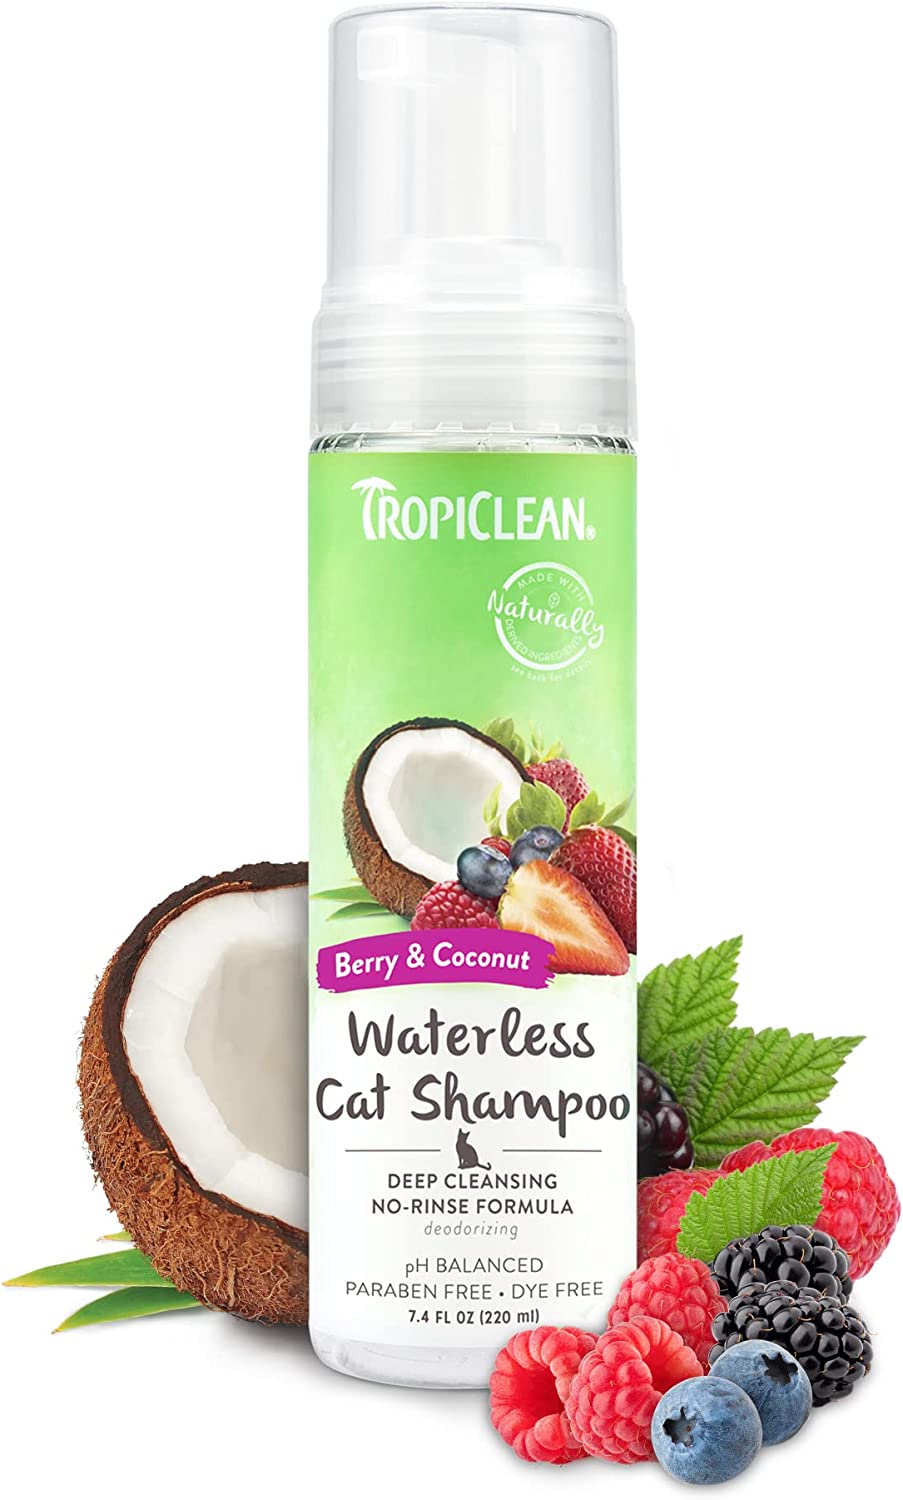 TropiClean Berry Coconut Waterless Cat Shampoo Deep Cleansing Dry Shampoo for Cats Natural Cat Shampoo Derived from Natural Ingredients